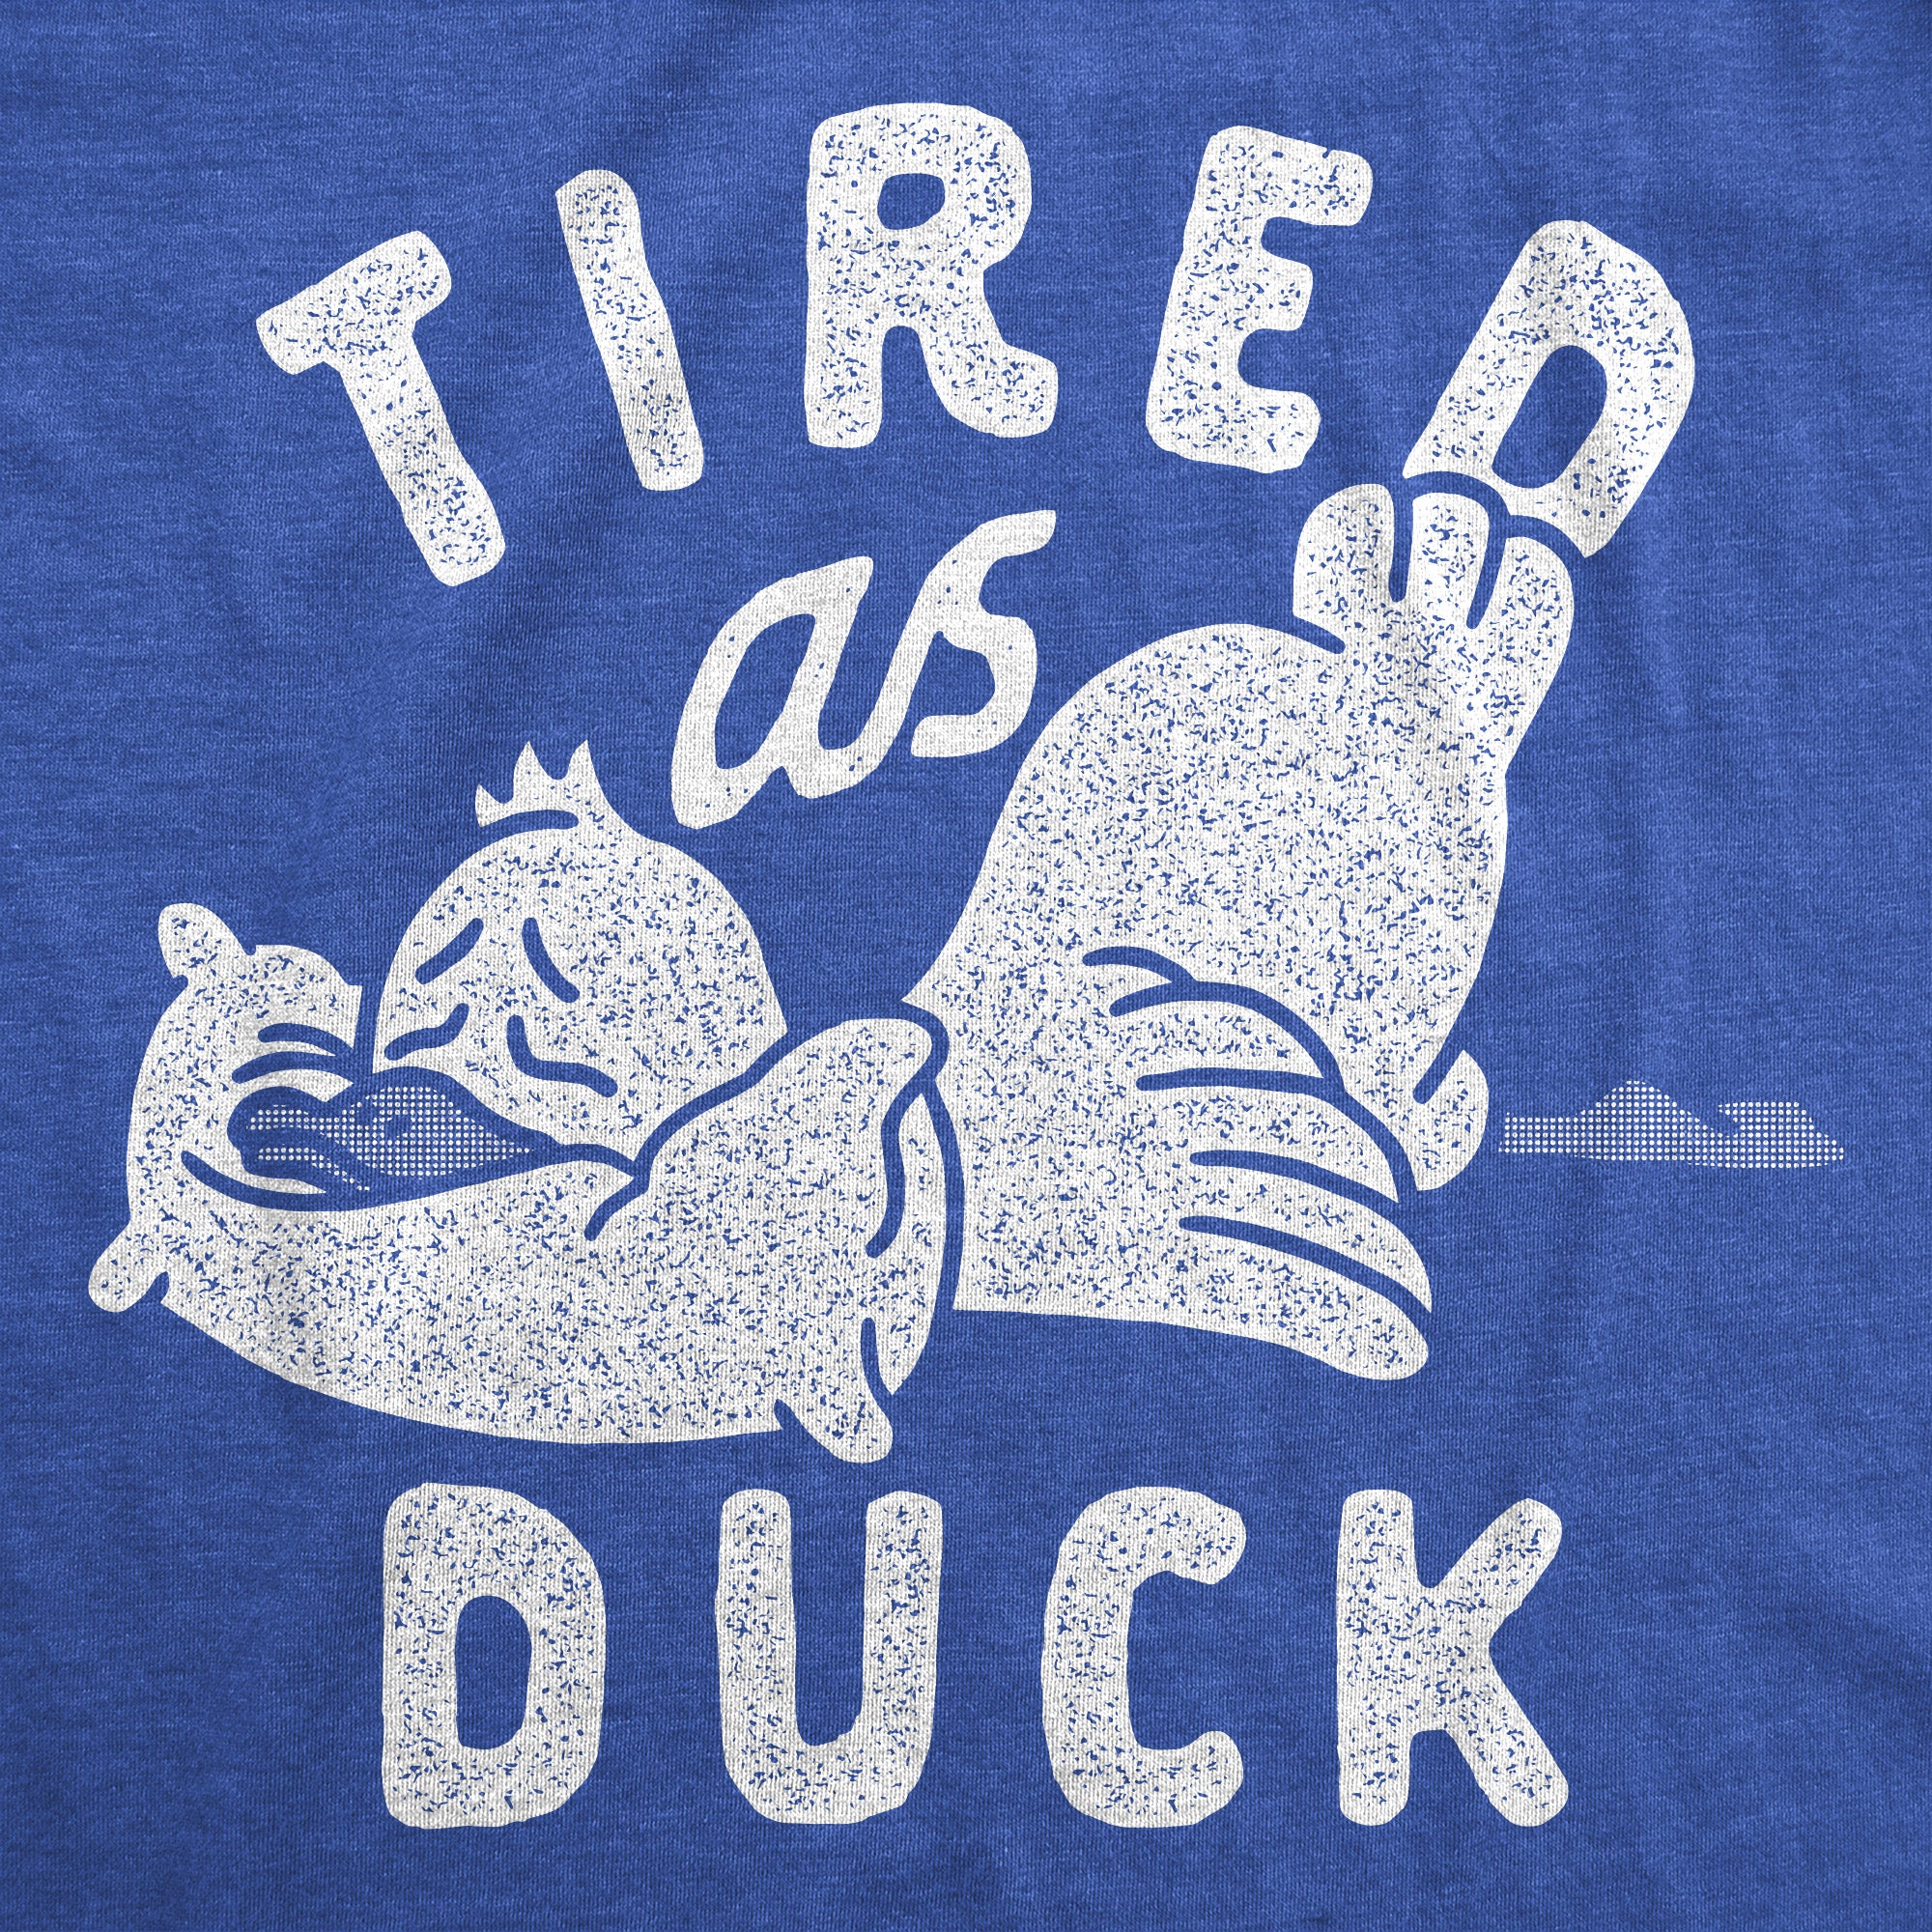 Funny Heather Royal - Tired As Duck Tired As Duck Womens T Shirt Nerdy animal sarcastic Tee